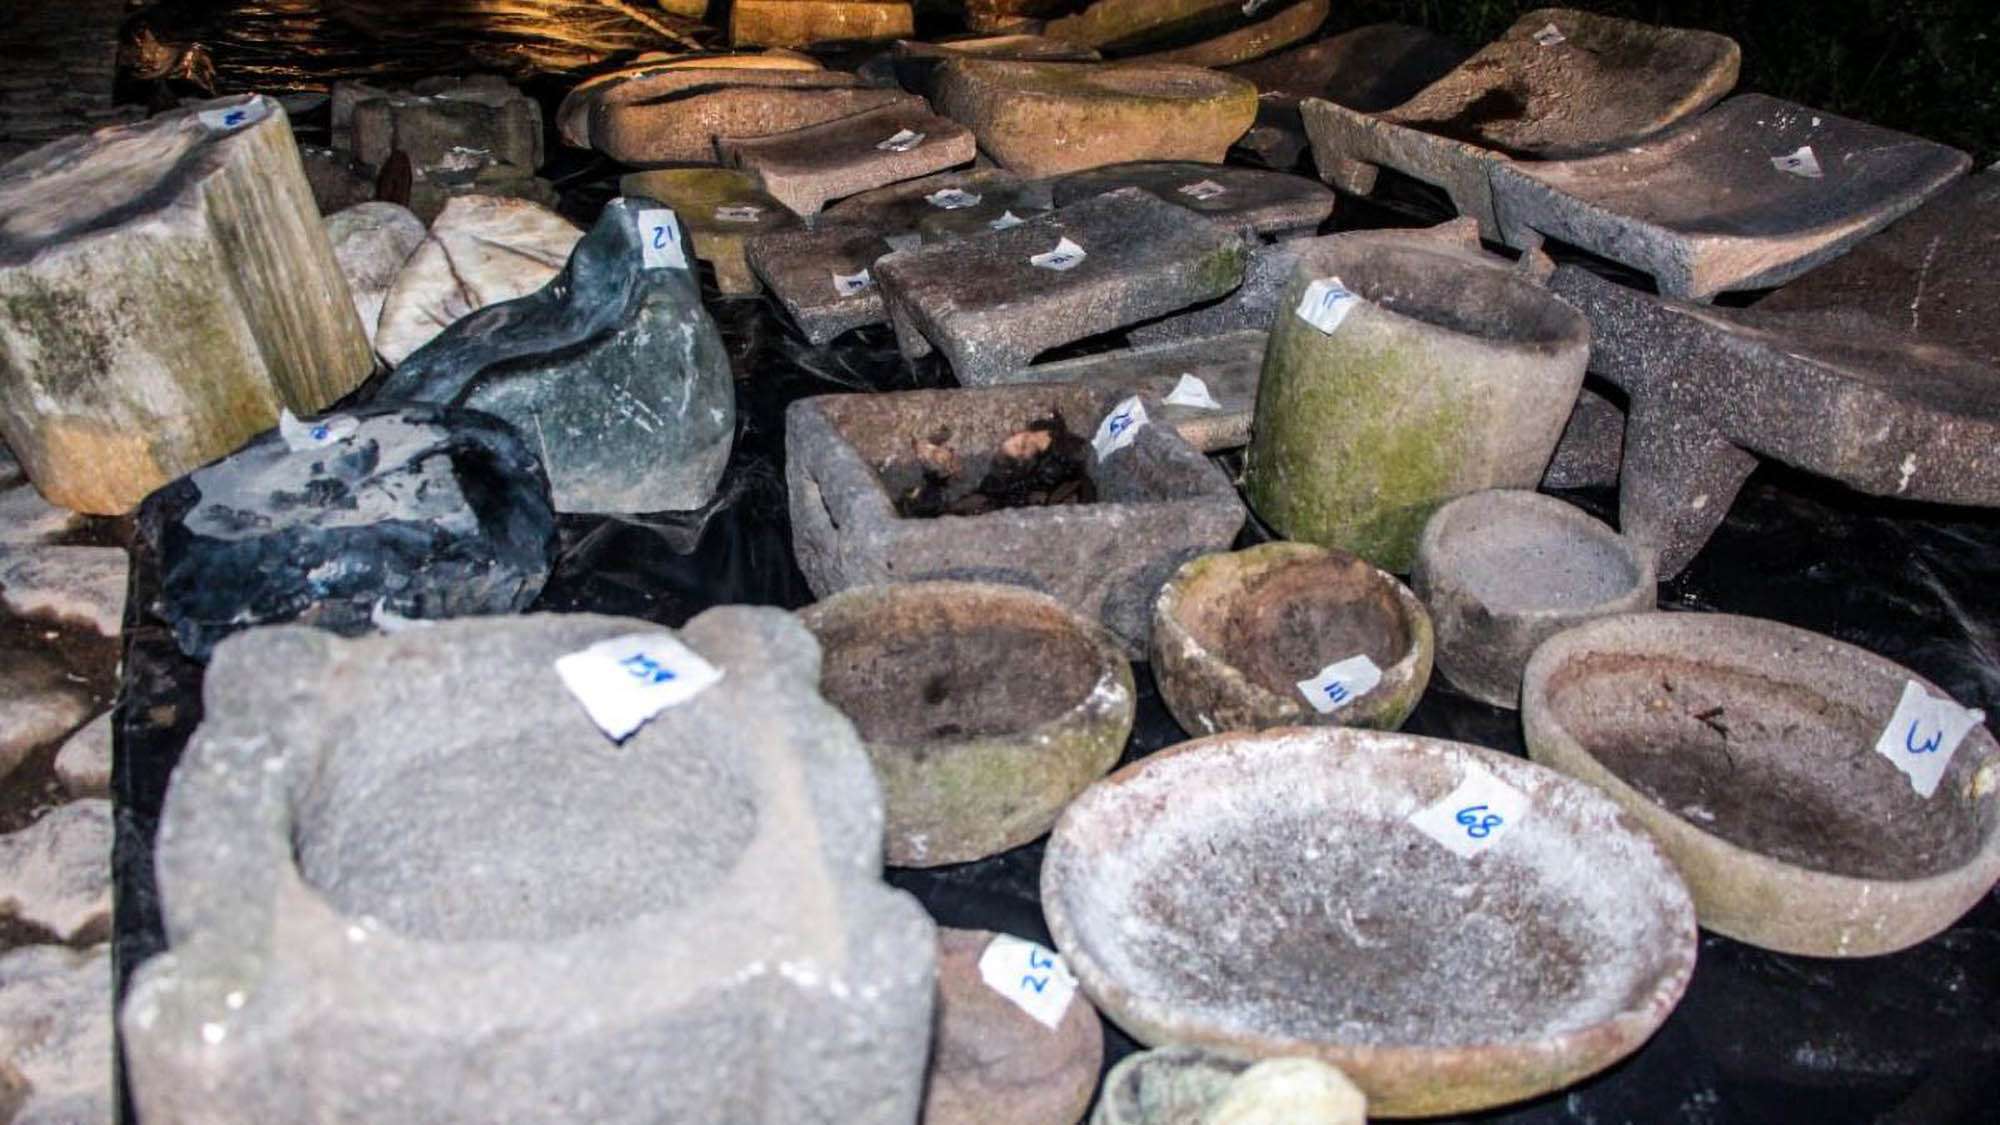 Read more about the article Customs Police Seize More Than 150 Mayan Treasures From American Travellers